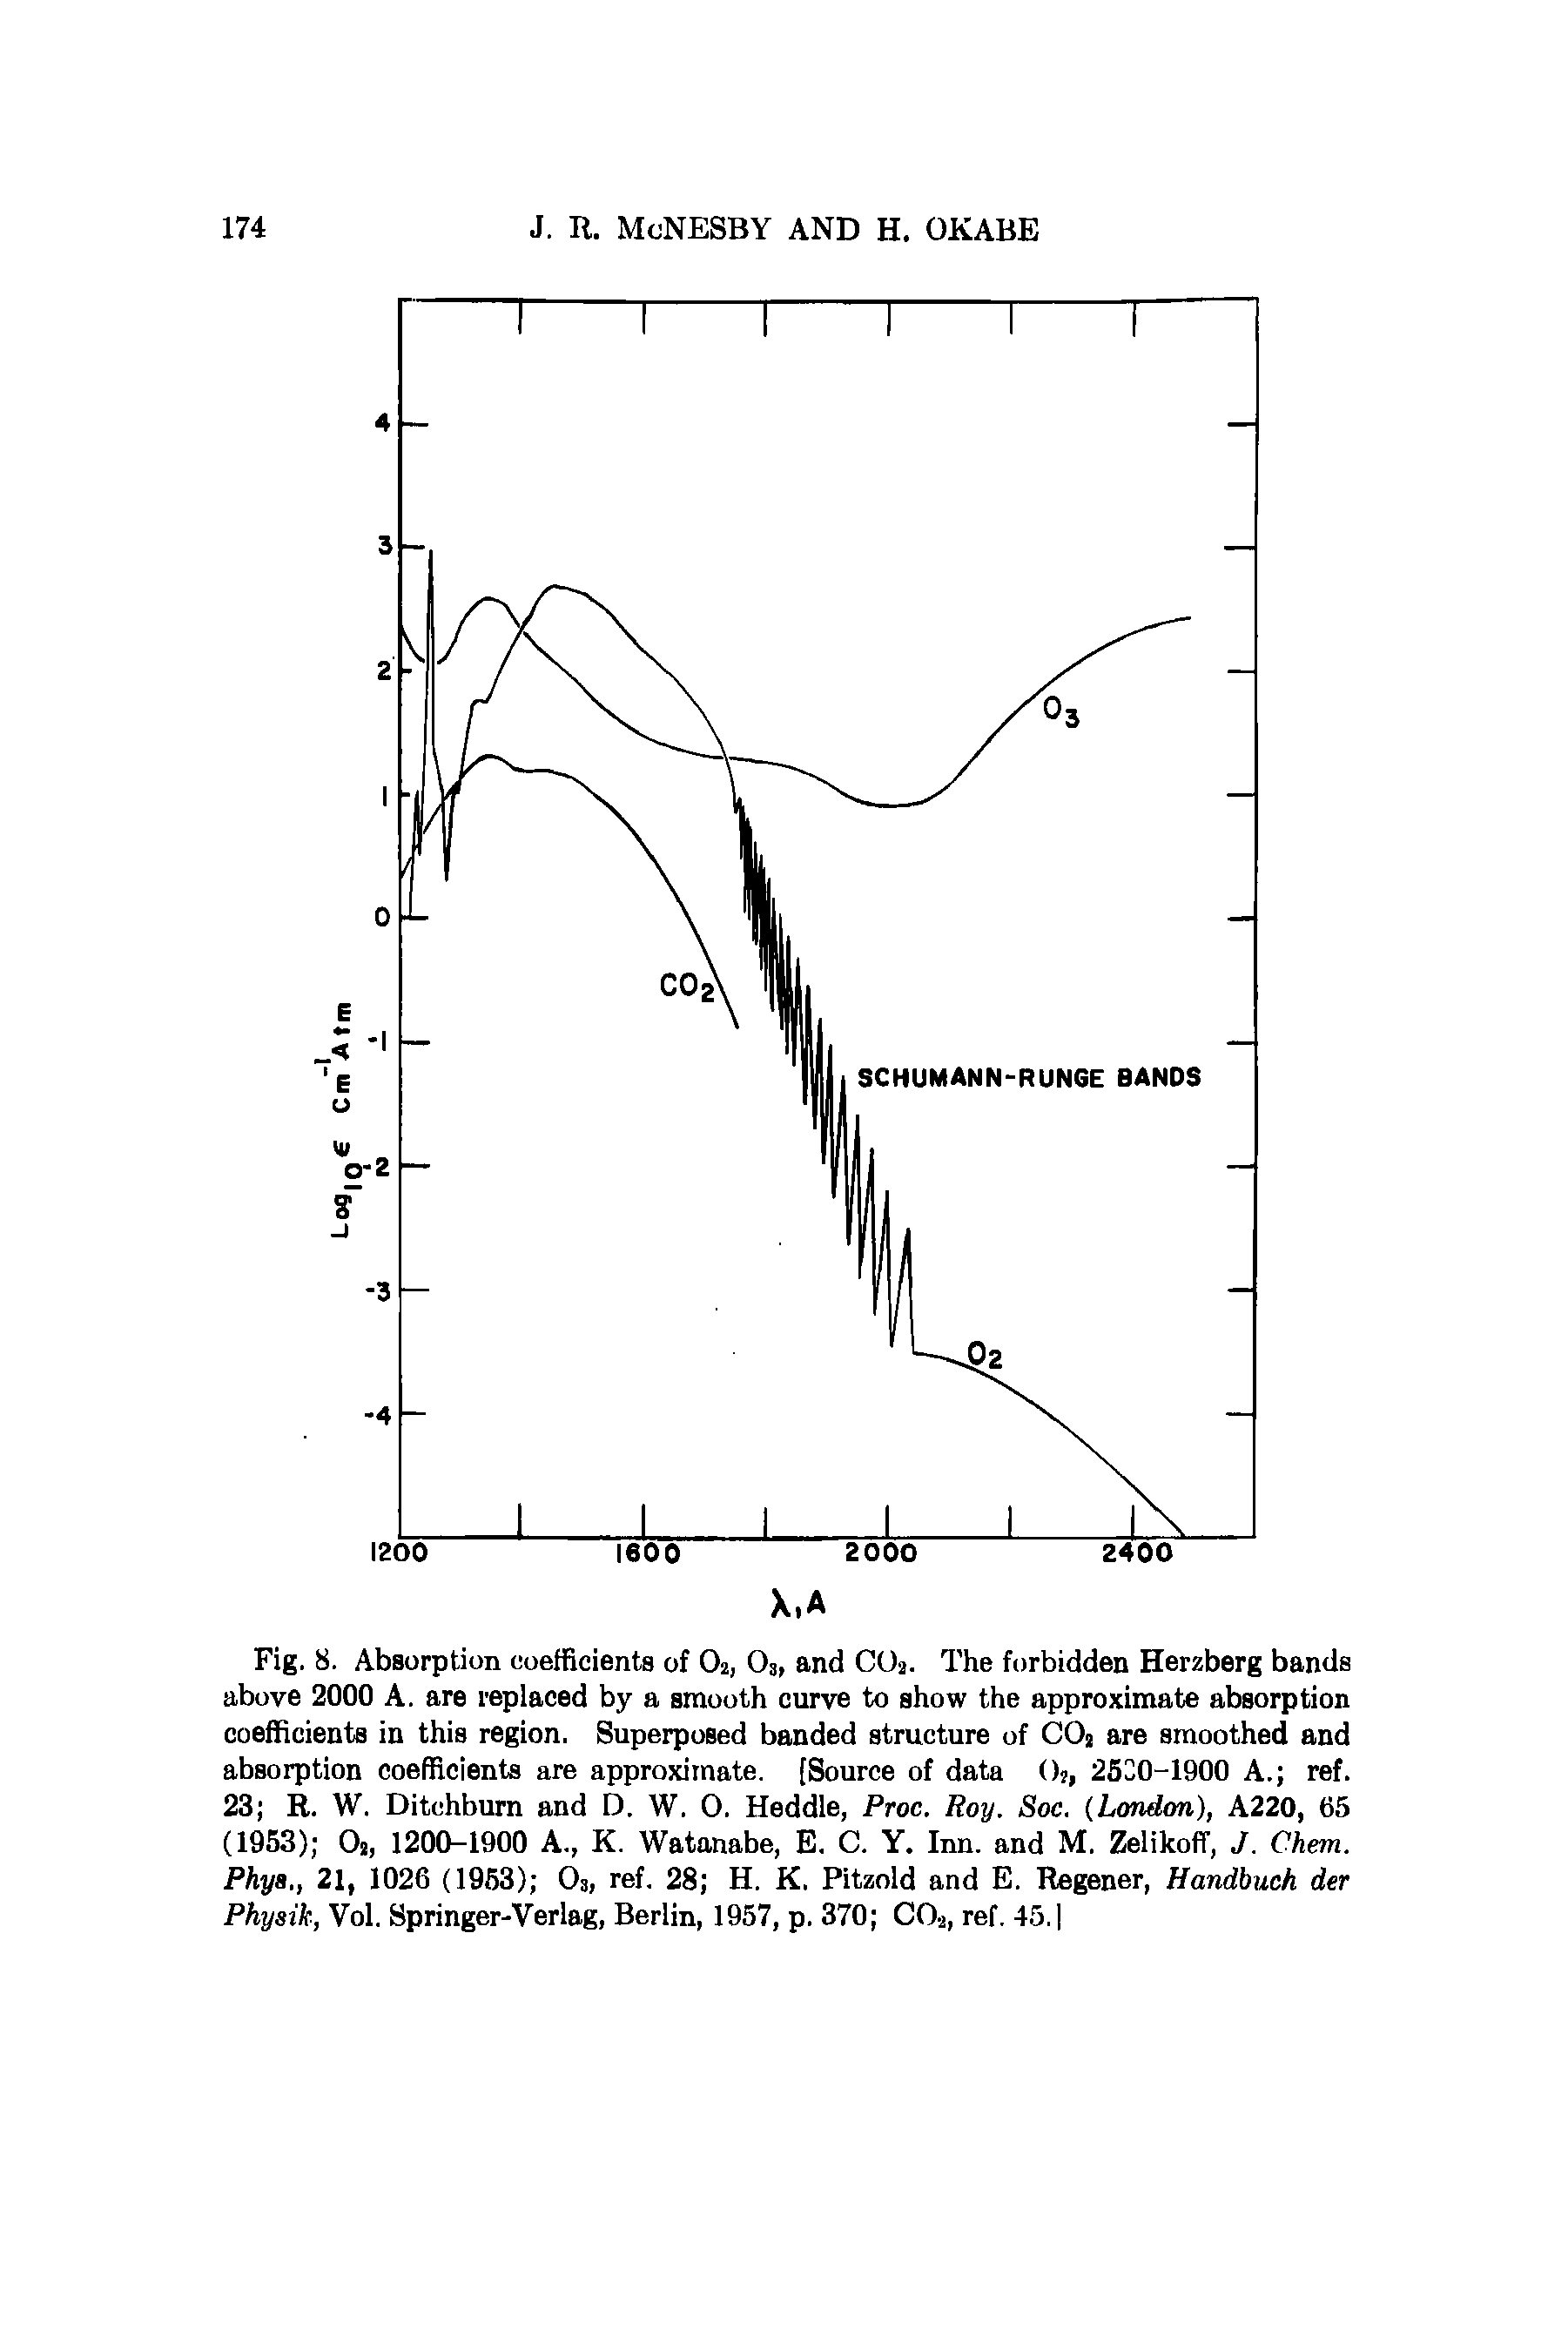 Fig. 8. Absorption coefficients of 02, 03, and 002. The forbidden Herzberg bands above 2000 A. are replaced by a smooth curve to show the approximate absorption coefficients in this region. Superposed banded structure of COj are smoothed and absorption coefficients are approximate. [Source of data () , 25C0-1900 A. ref. 23 R. W. Ditchburn and D. W. 0. Heddle, Proc. Roy. Soc. (London), A220, 65 (1953) Oj, 1200-1900 A., K. Watanabe, E. C. Y. Inn. and M. Zelikoff, J. Chem. Phya., 21, 1026 (1953) 03, ref. 28 H. K. Pitzold and E. Regener, Handbuch der Physik, Vol. Springer-Verlag, Berlin, 1957, p. 370 C02, ref. 45. ...